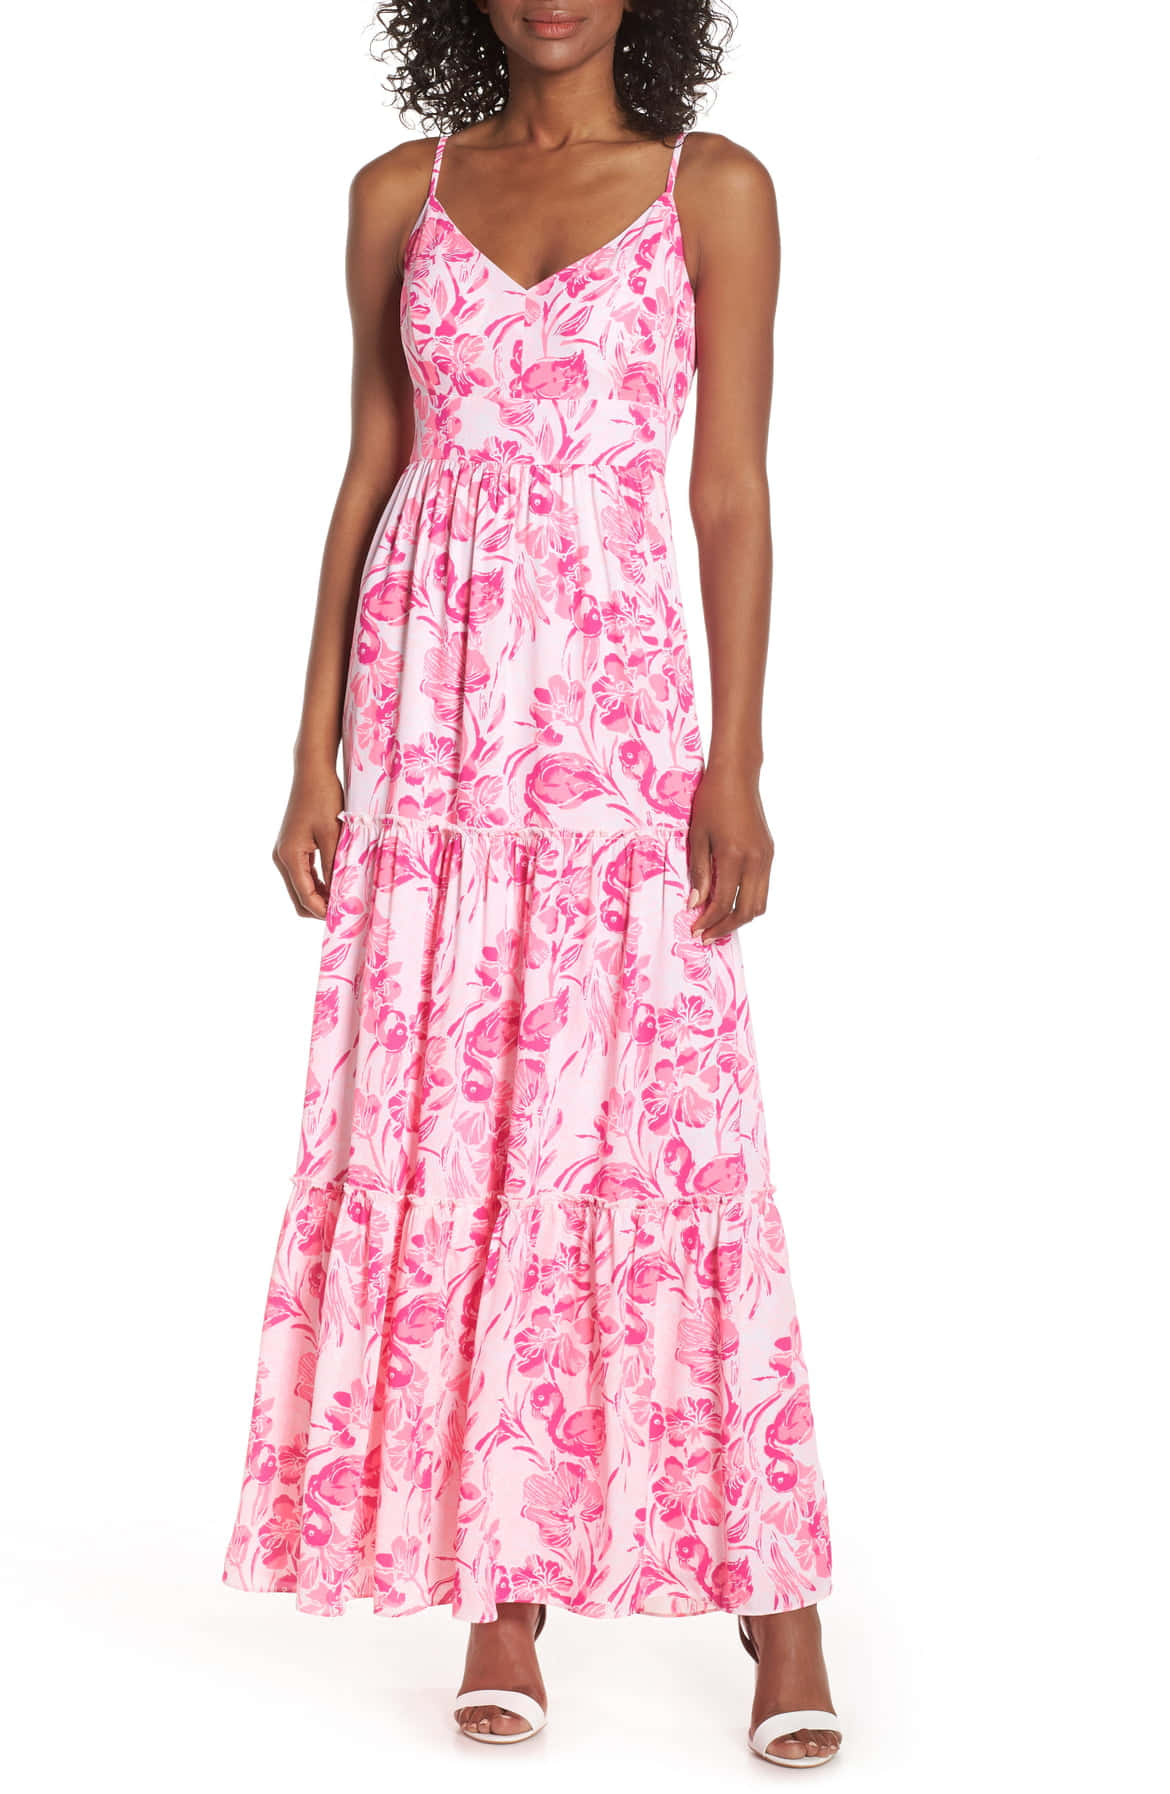 Enjoy the bright and beautiful designs of Lilly Pulitzer